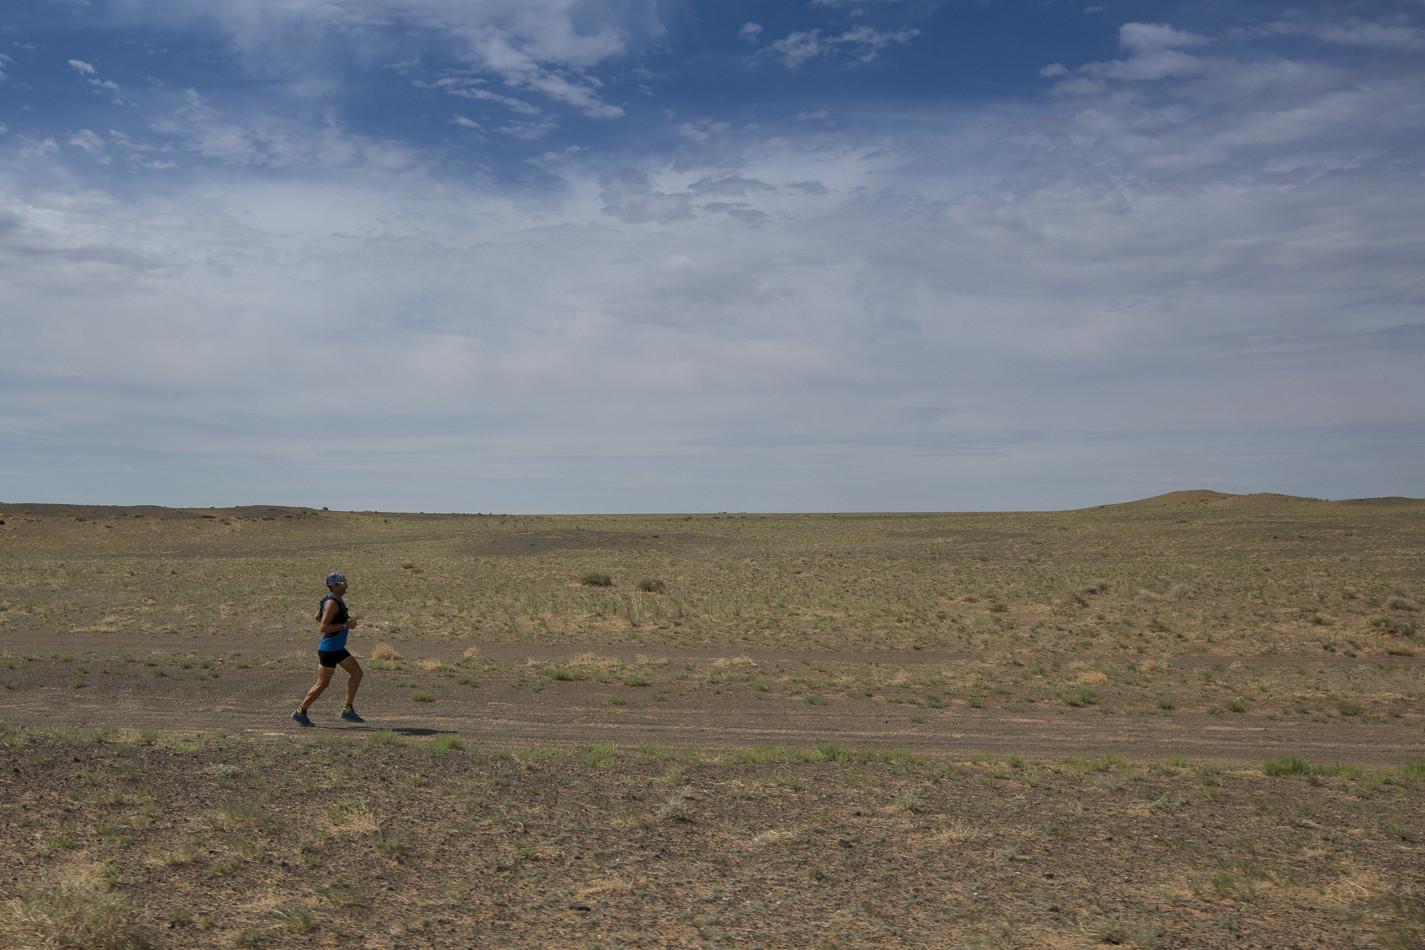 Expedition Gobi Update: 20 Days In And Challenges Ahead